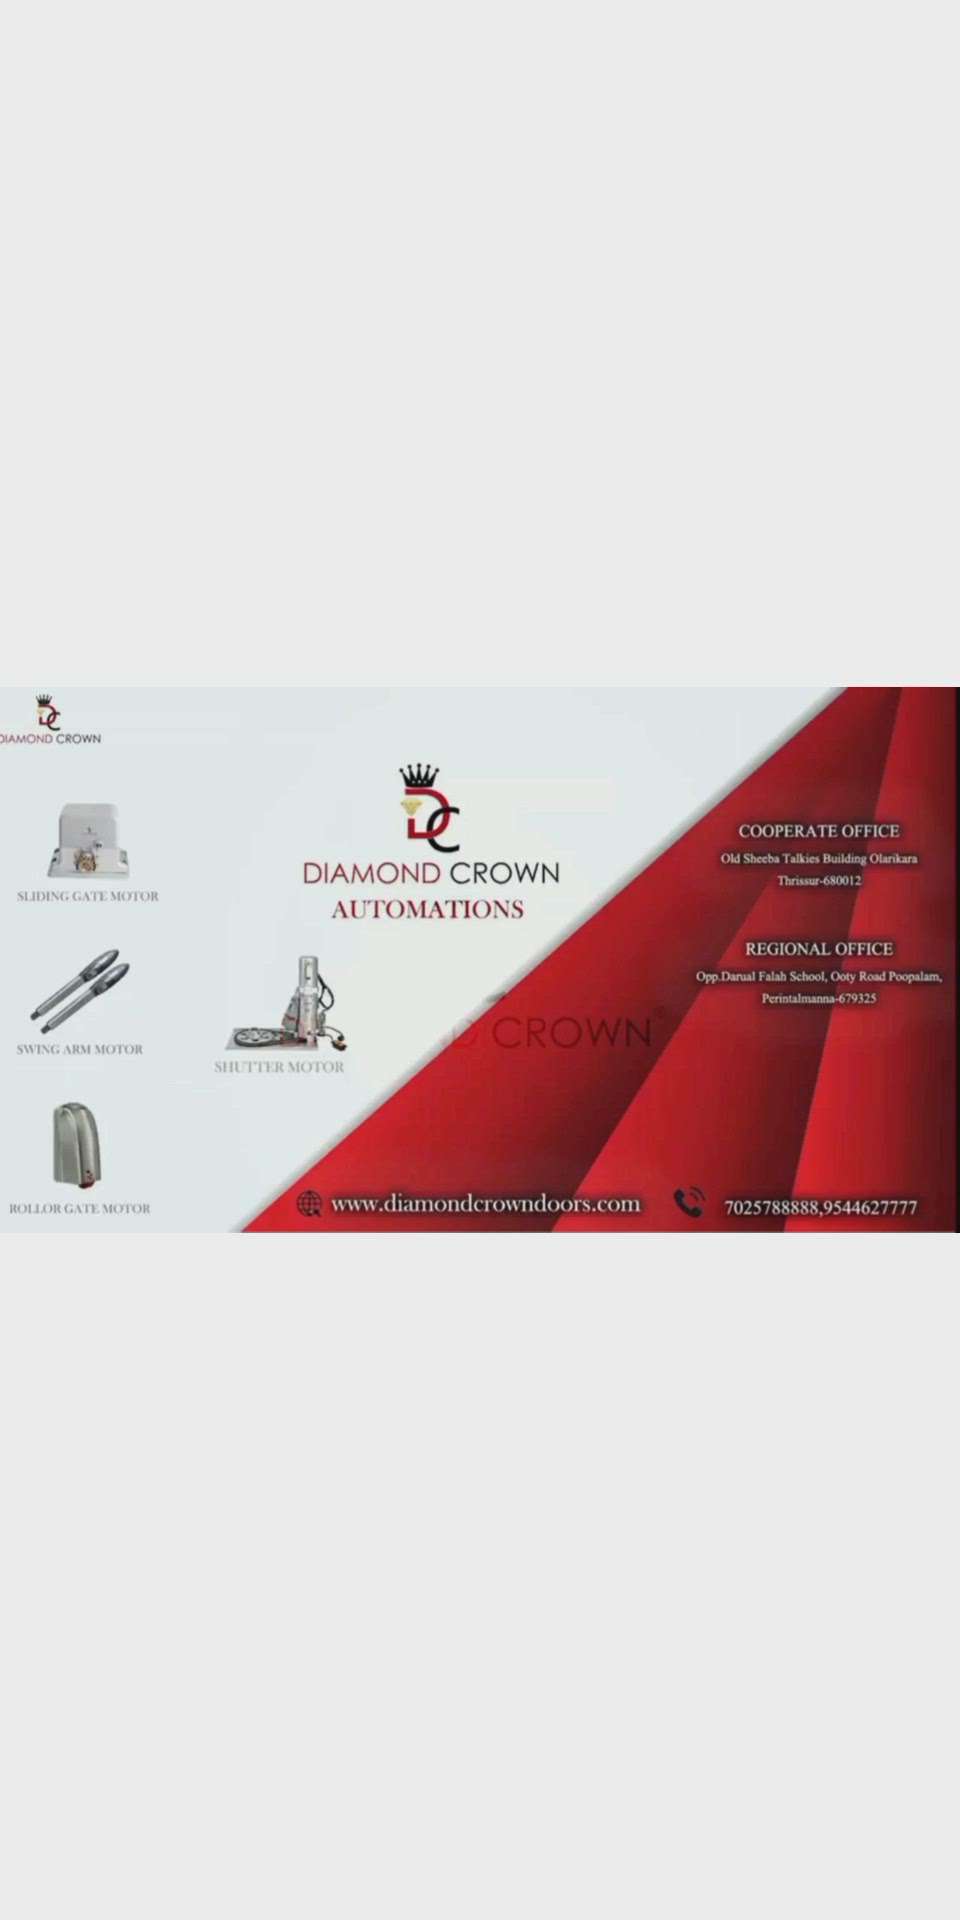 Gate Automation Services...
Get in touch with Diamond Crown for the most modern gate automation technologies. 
For more details contact: 09142777762 , 7025117777, 7025788888, 9544725583
#diamondcrownautomation #automaticgate #swinggate #remotegate  #homeautomation #crownmarketing #slidinggatemotors #slidinggate #moderndesign #beautiful #smarthome #home #interiordesign  #keralagram #keralatourism #keralagodsowncountry #keralam #entekeralam #keralaattraction #kerala360 #keralagallery #keraladiaries